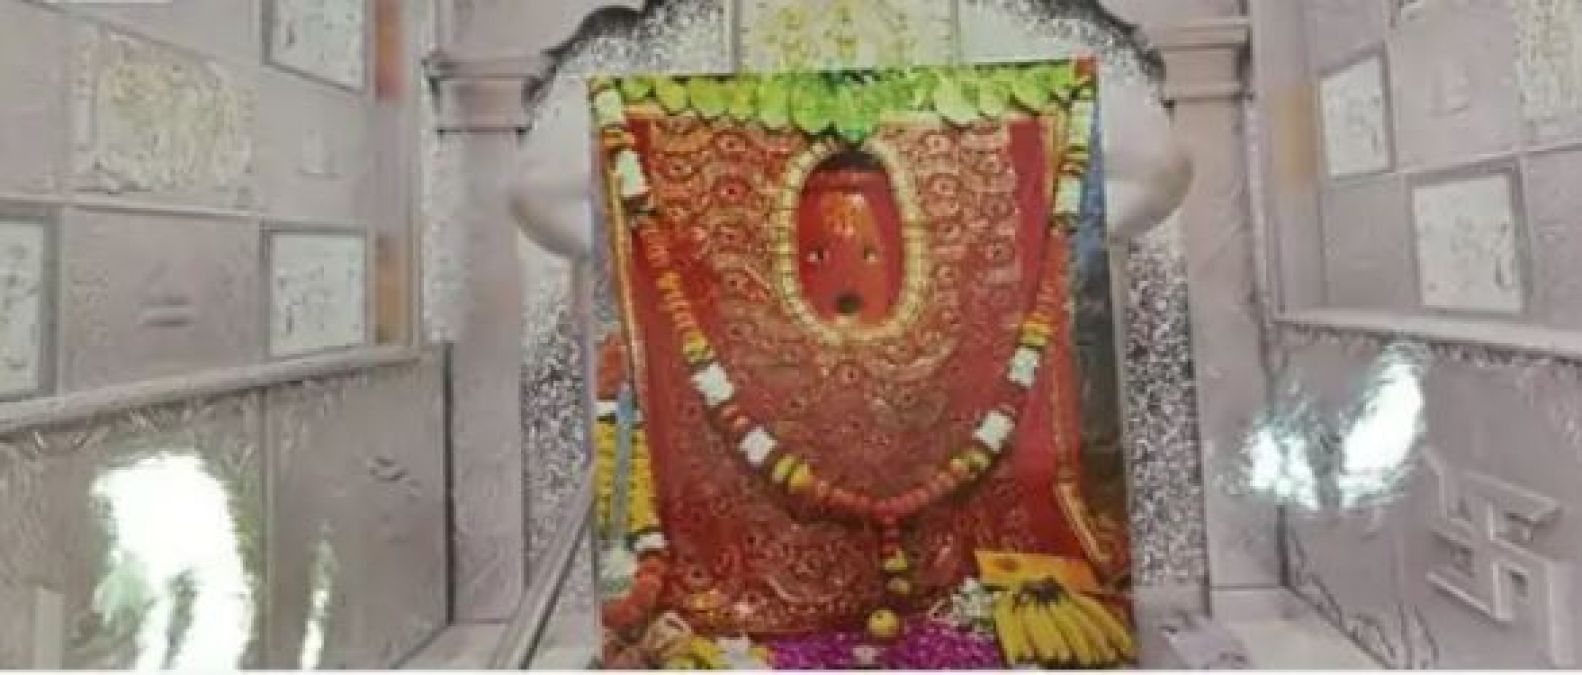 'Ranjeet Hanuman' will sit in the sanctum sanctorum of 300 kg silver, know some more special things about it